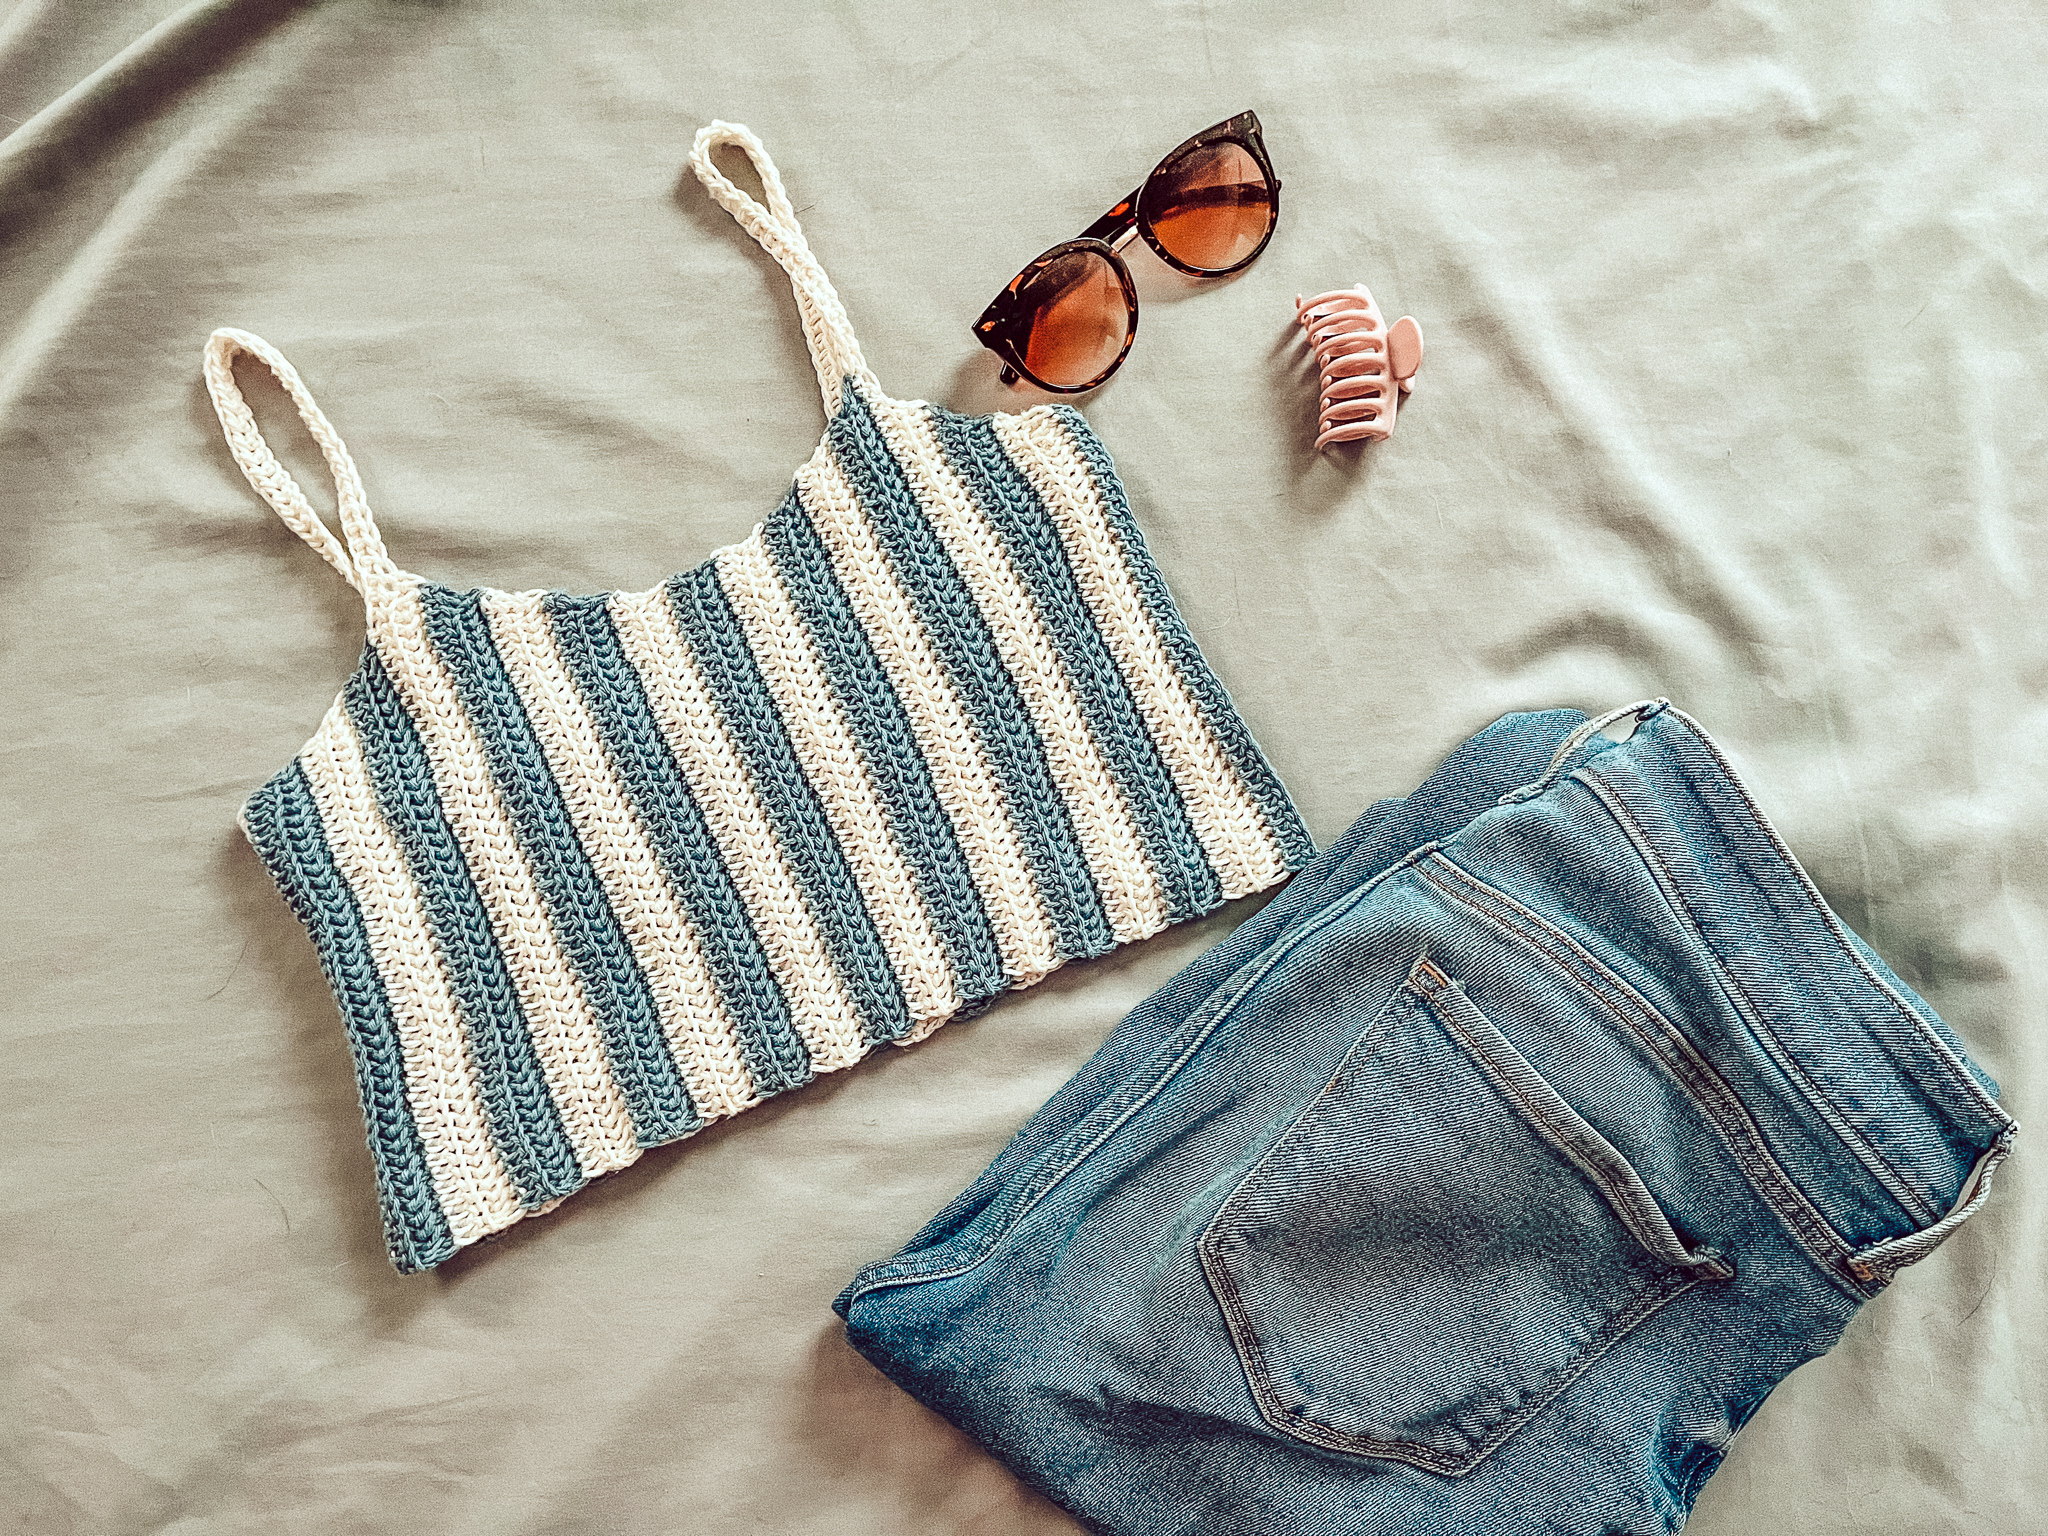 a blue and white striped crocheted crop top is on a bed with a pair of jeans, sunglasses and a hair clip.